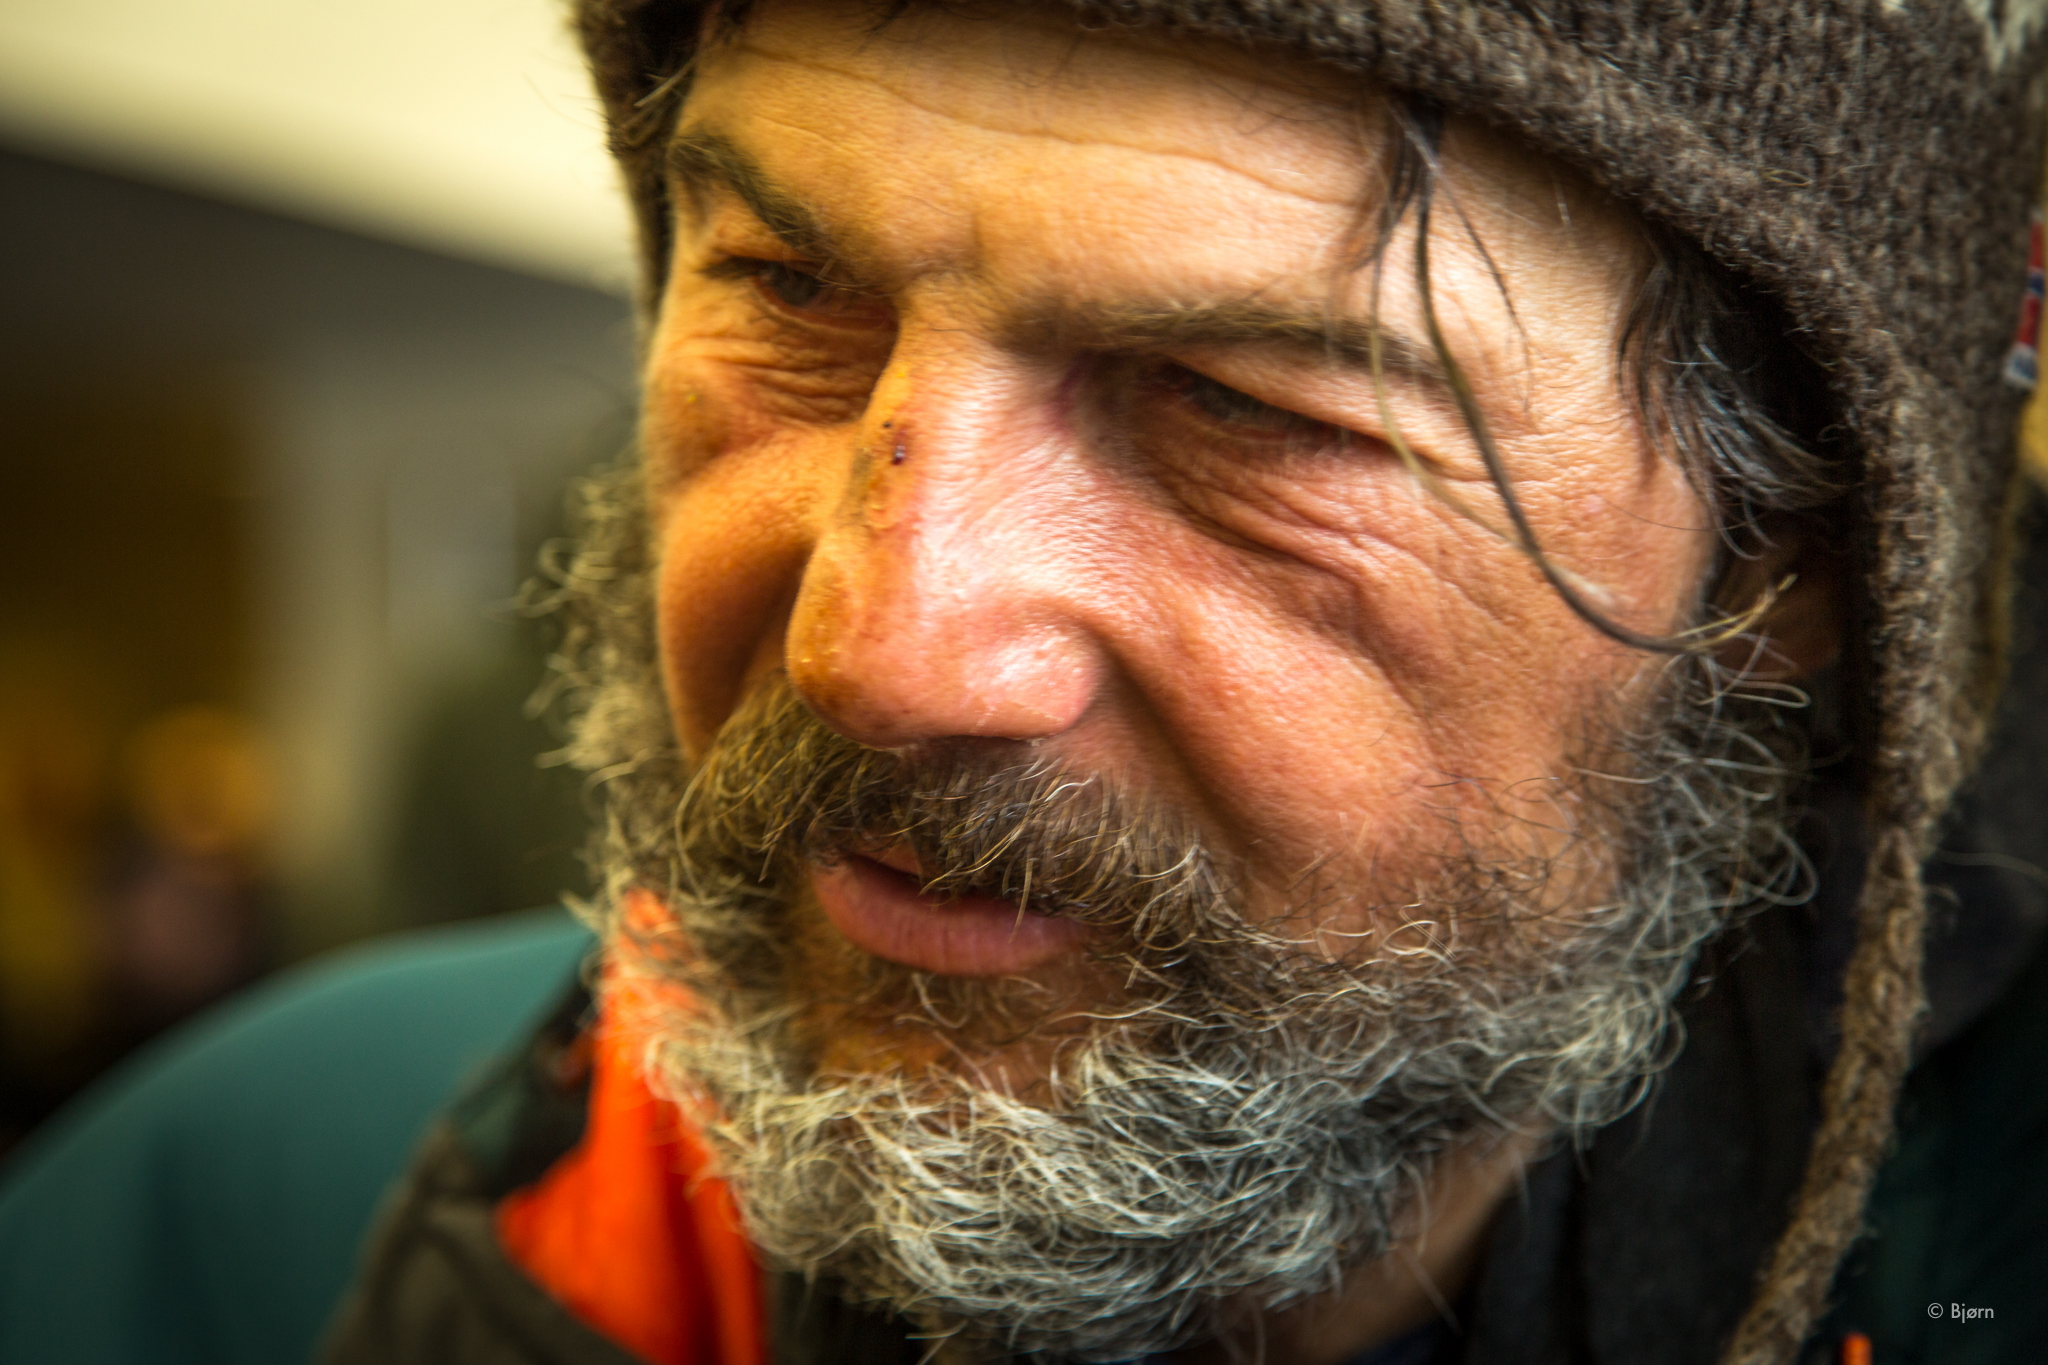     We saw Jan Kriska, the first walker into Nome at the airport. He'd walked 48 hours straight from White Mountain and looked entirely destroyed. He'd had to abandon his journey last year due to frostbite and this year was beset with intensely deep 